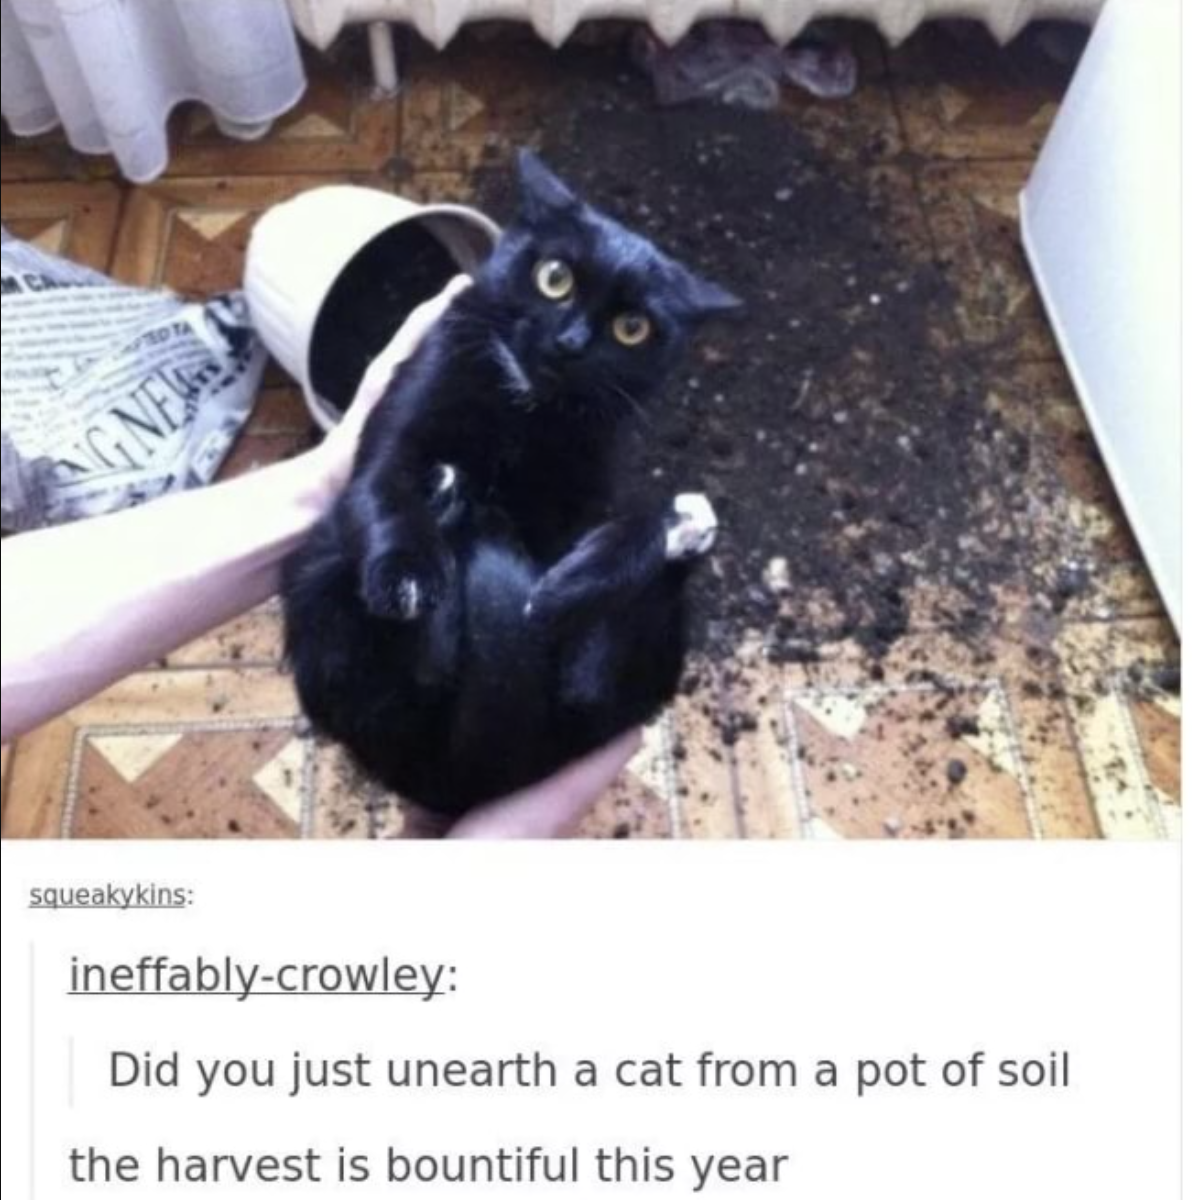 A cat being held above an overturned plant pot with soil all over the floor, with caption &quot;Did you just unearth a cat from a pot of soil&quot; &quot;the harvest is bountiful this year&quot;